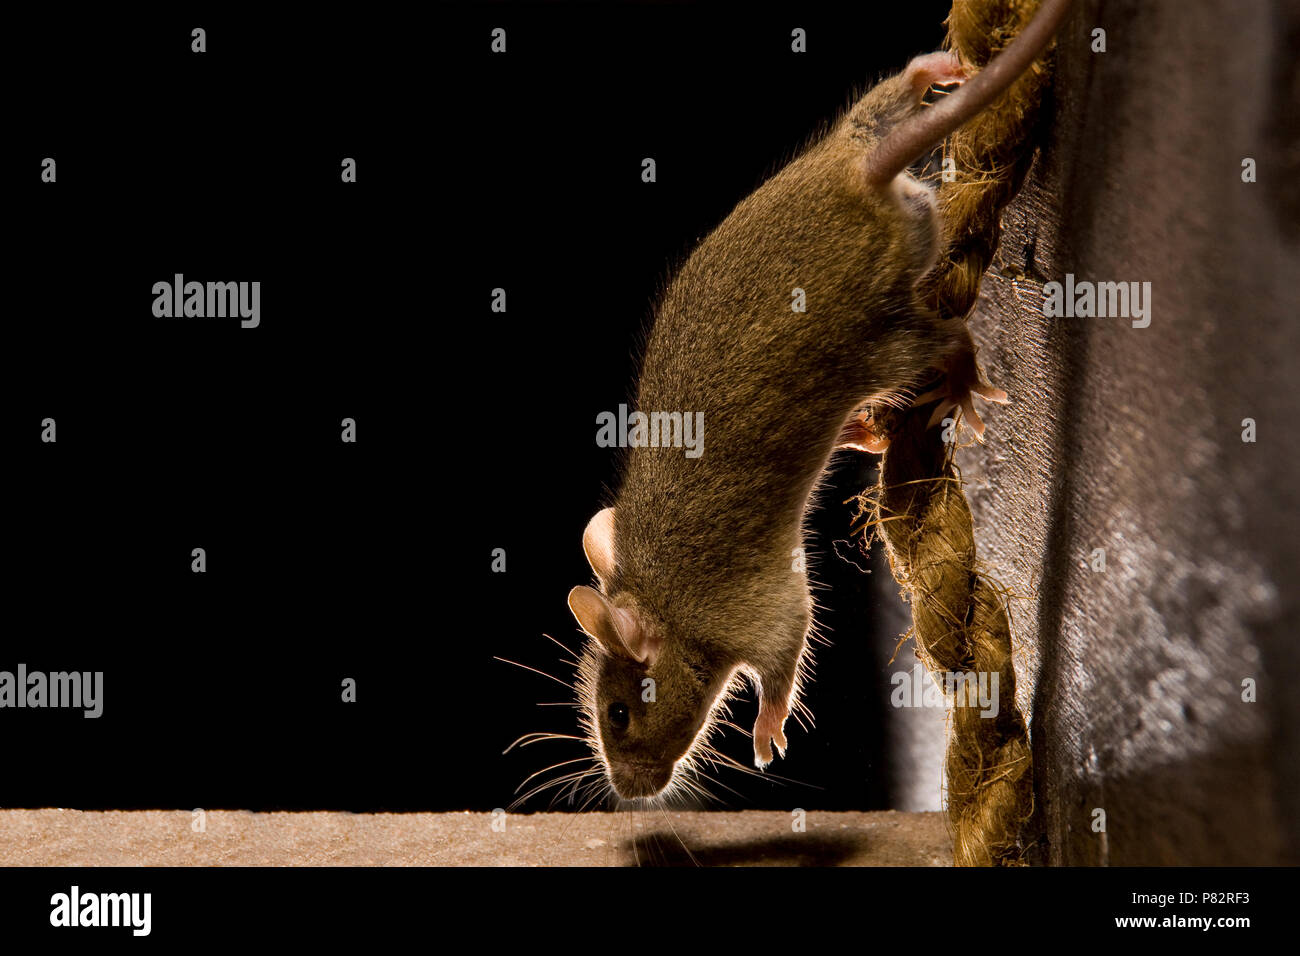 Huismuis op een touw; House Mouse on a rope Stock Photo